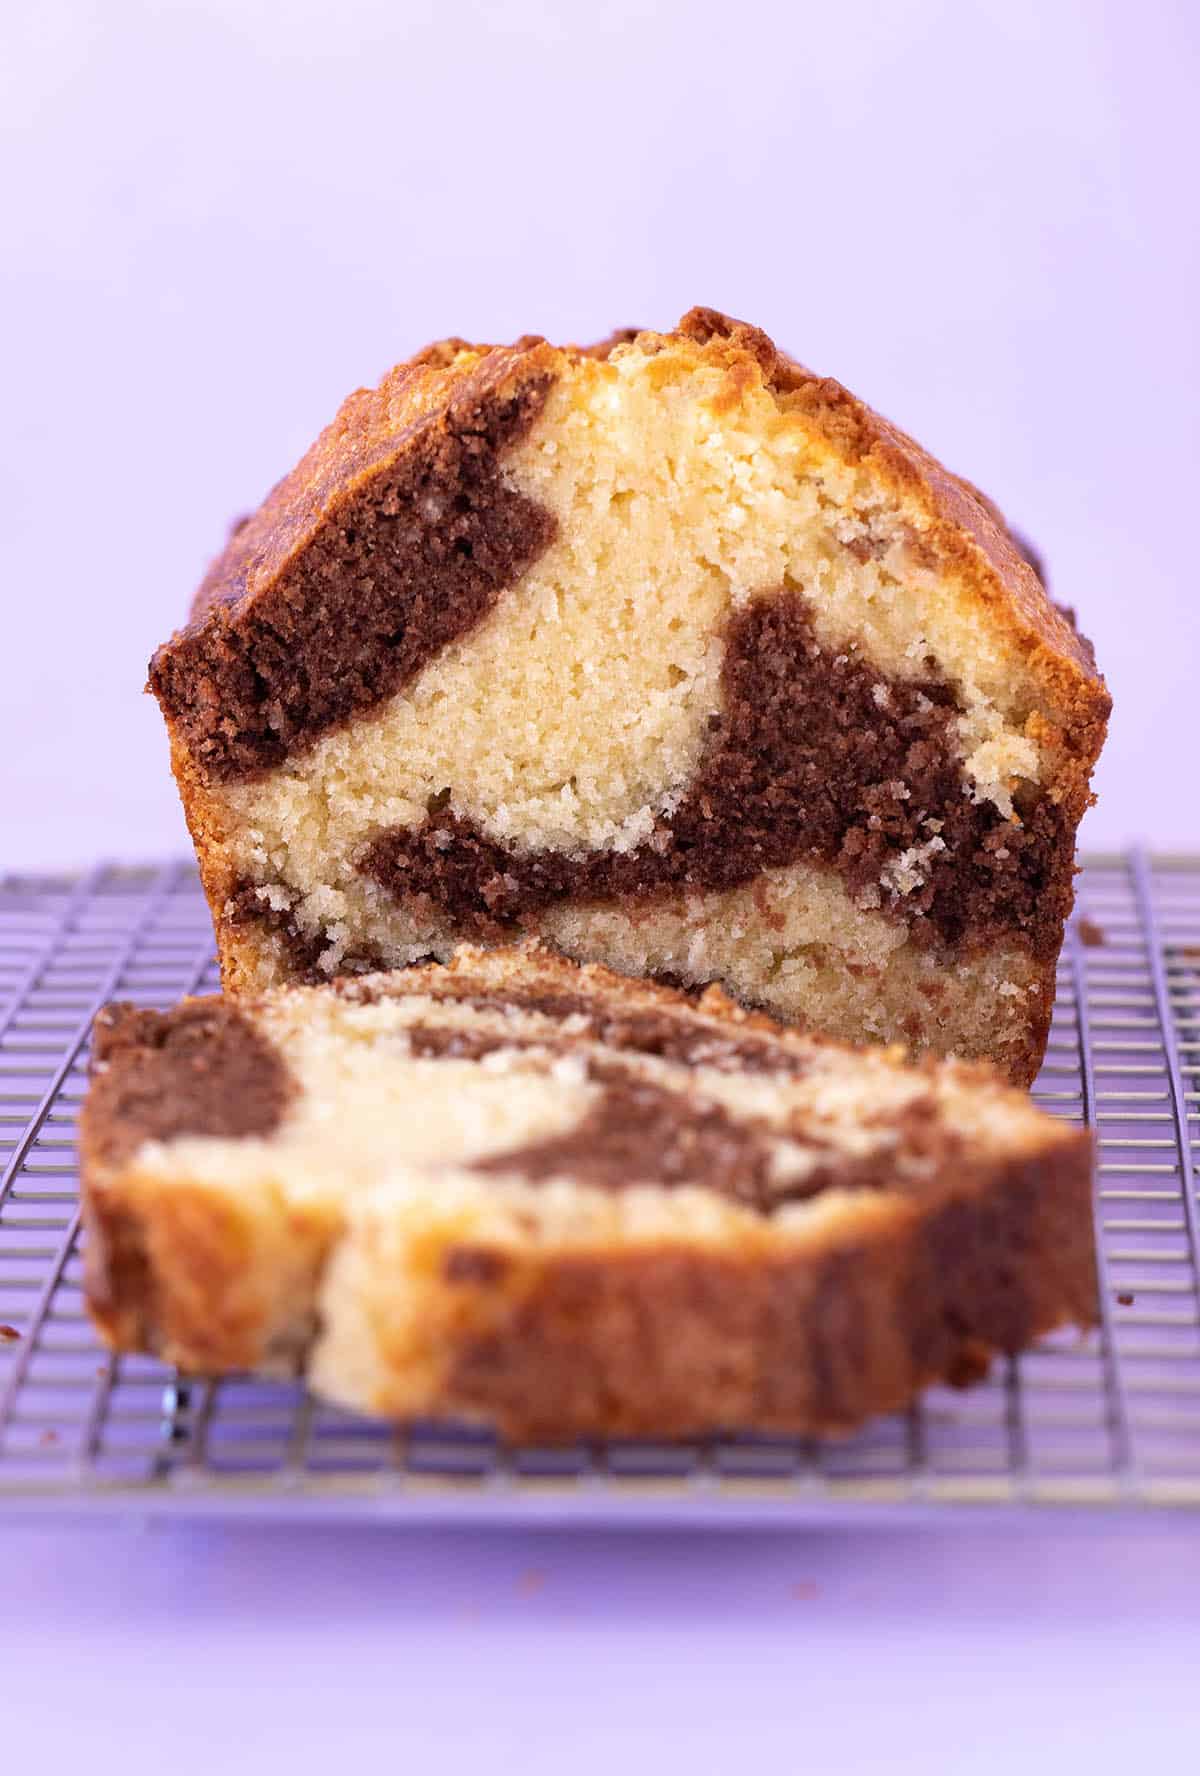 Where Can I Find Marble Cake Mix? 